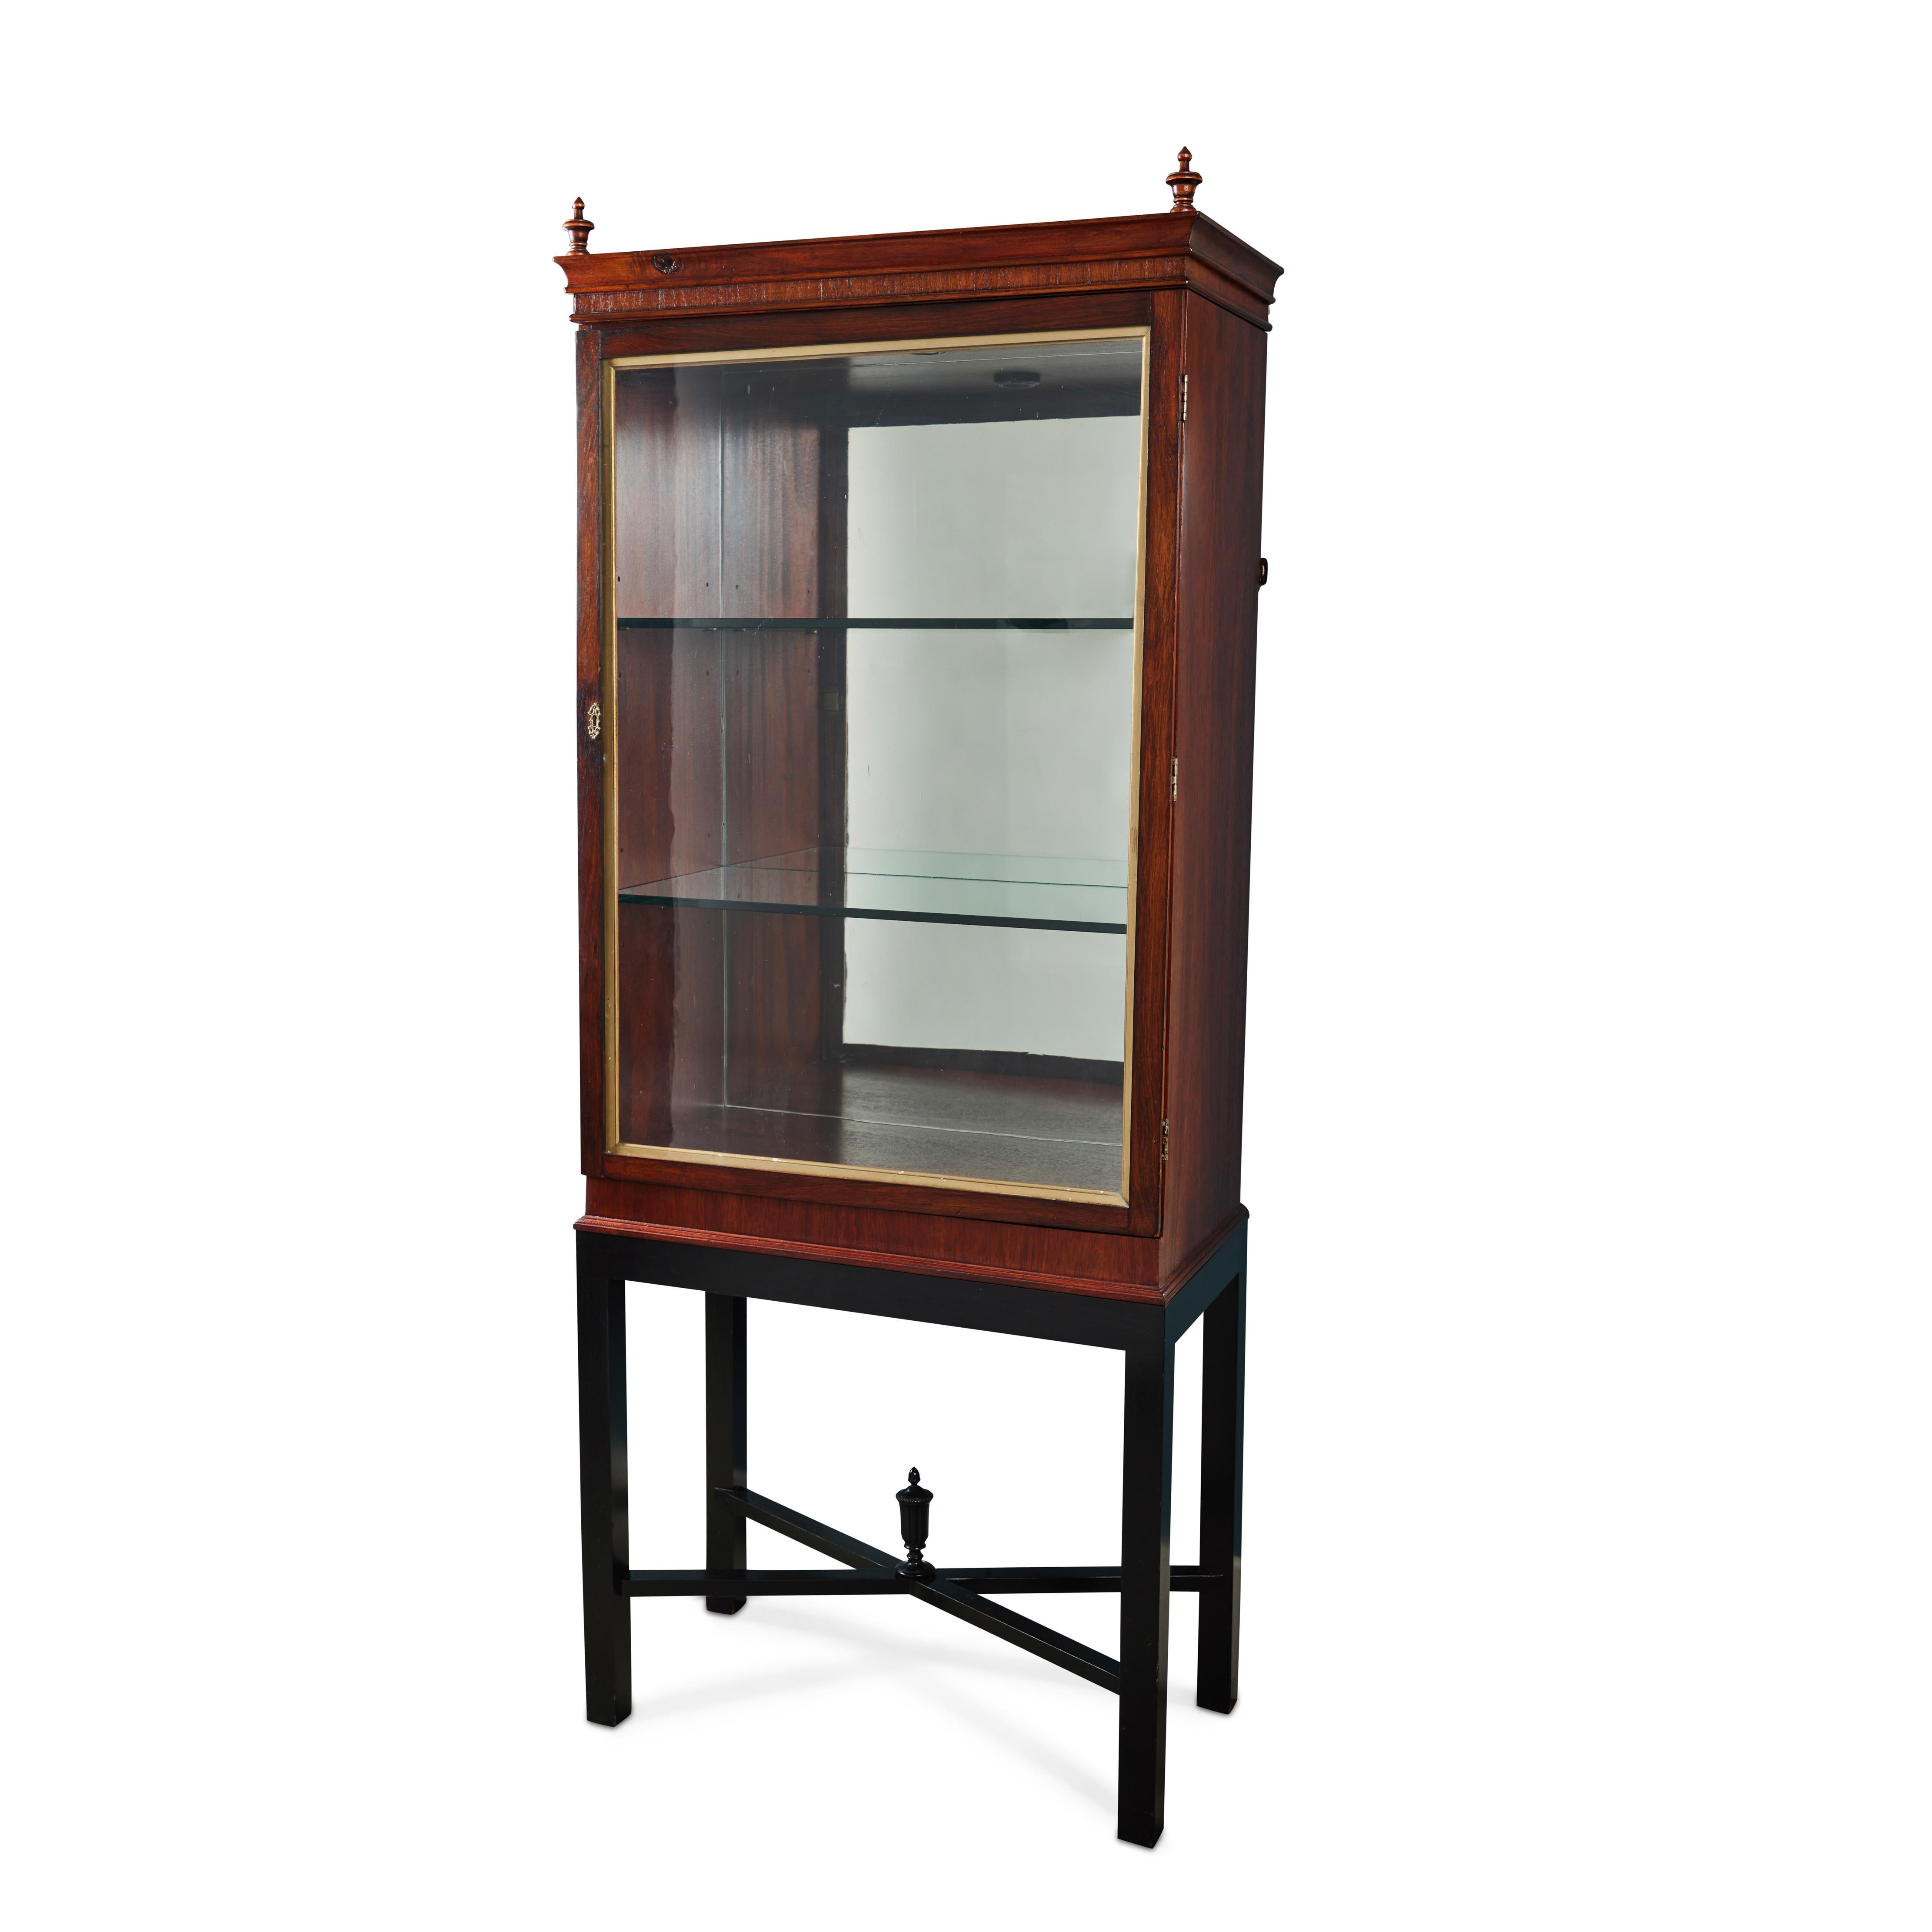 This elegant vintage mahogany display cabinet has a mirrored back and two glass shelves to exhibit your special treasures.  Adorned with black cross-bar connecting legs and a decorative urn detail, it comes with a gorgeous hand blown glass door and